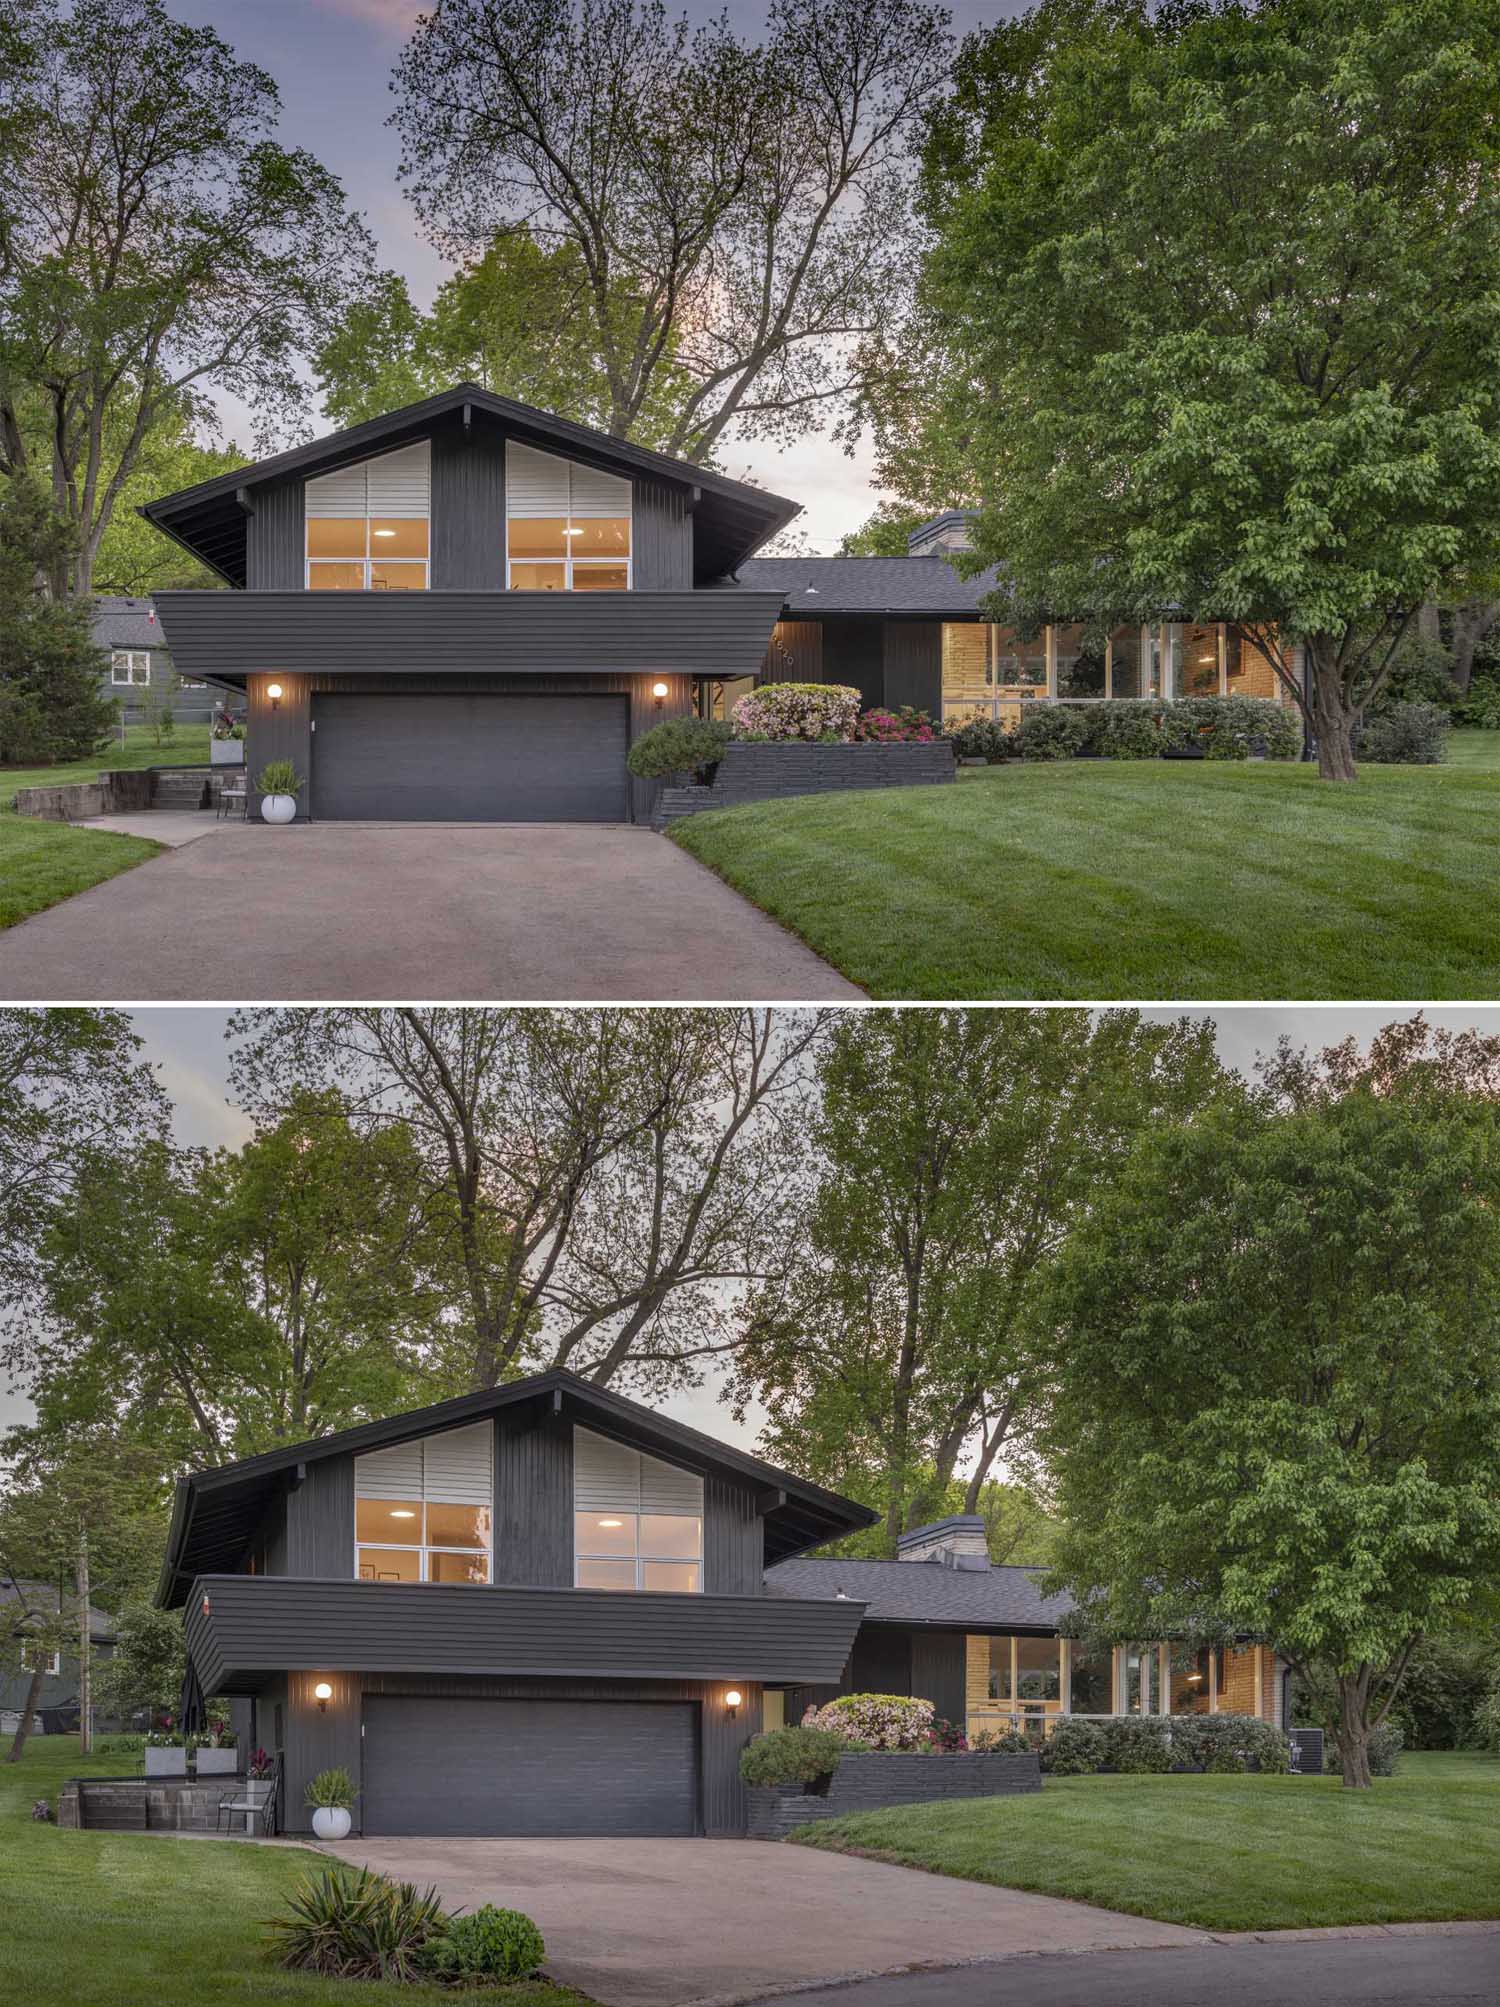 An updated mid-century modern home with a new dark exterior.